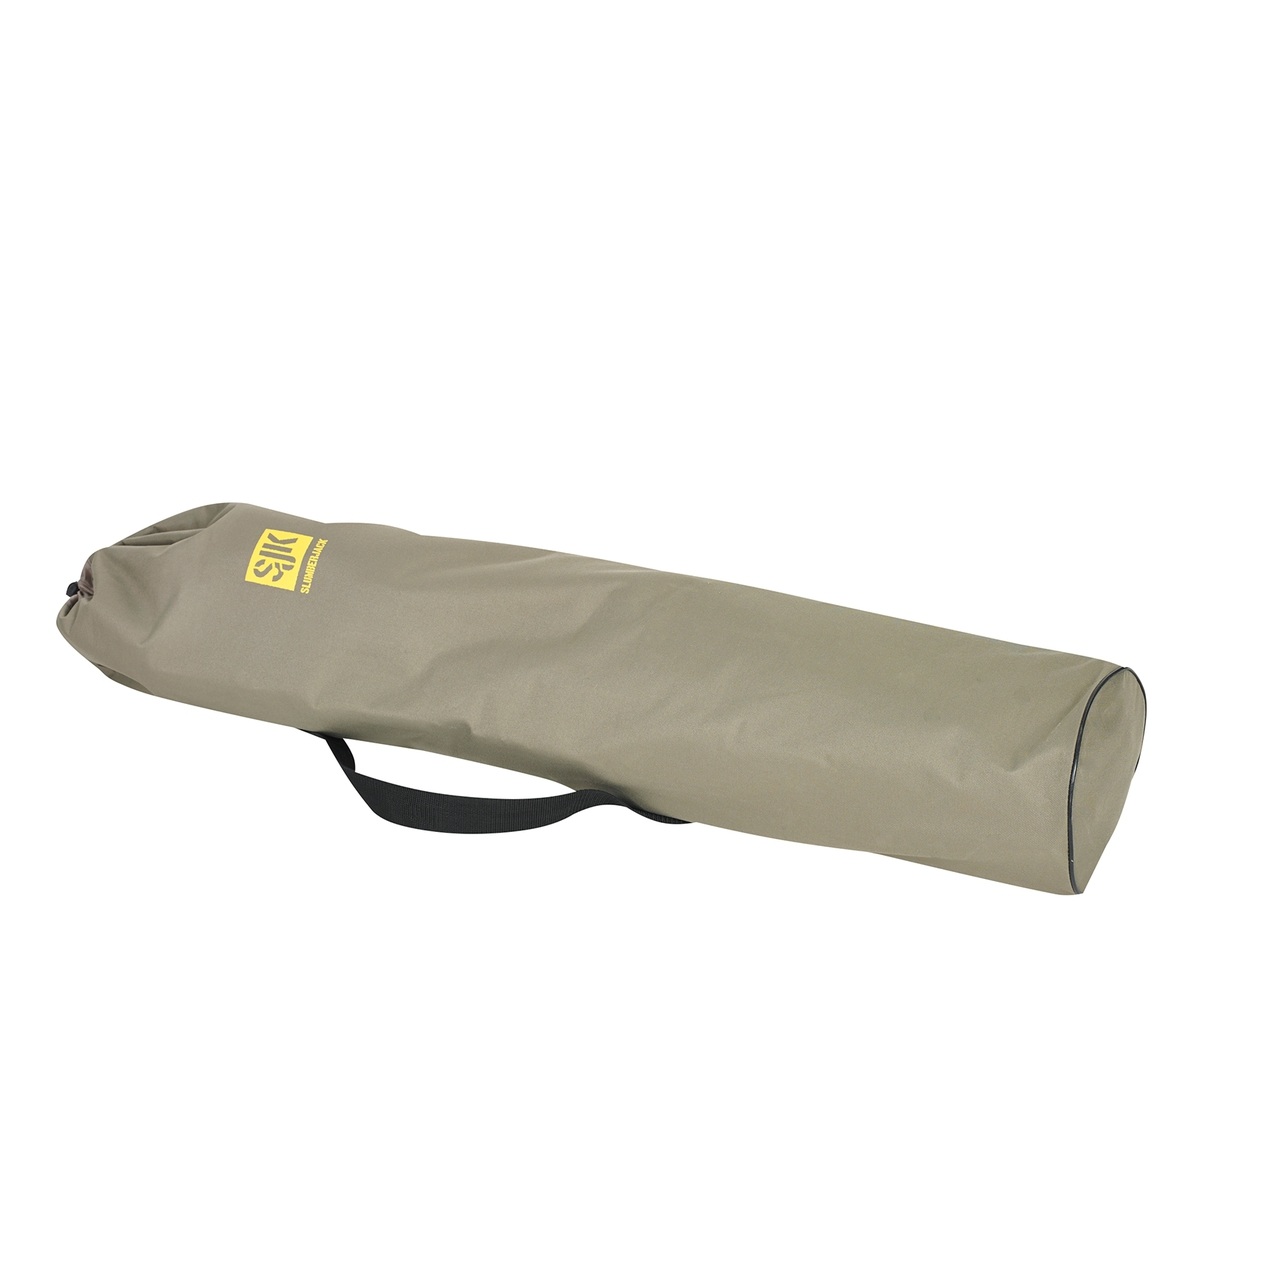 Collapsed SJK Tough Cot in matching carry bag for convenient transport & storage.